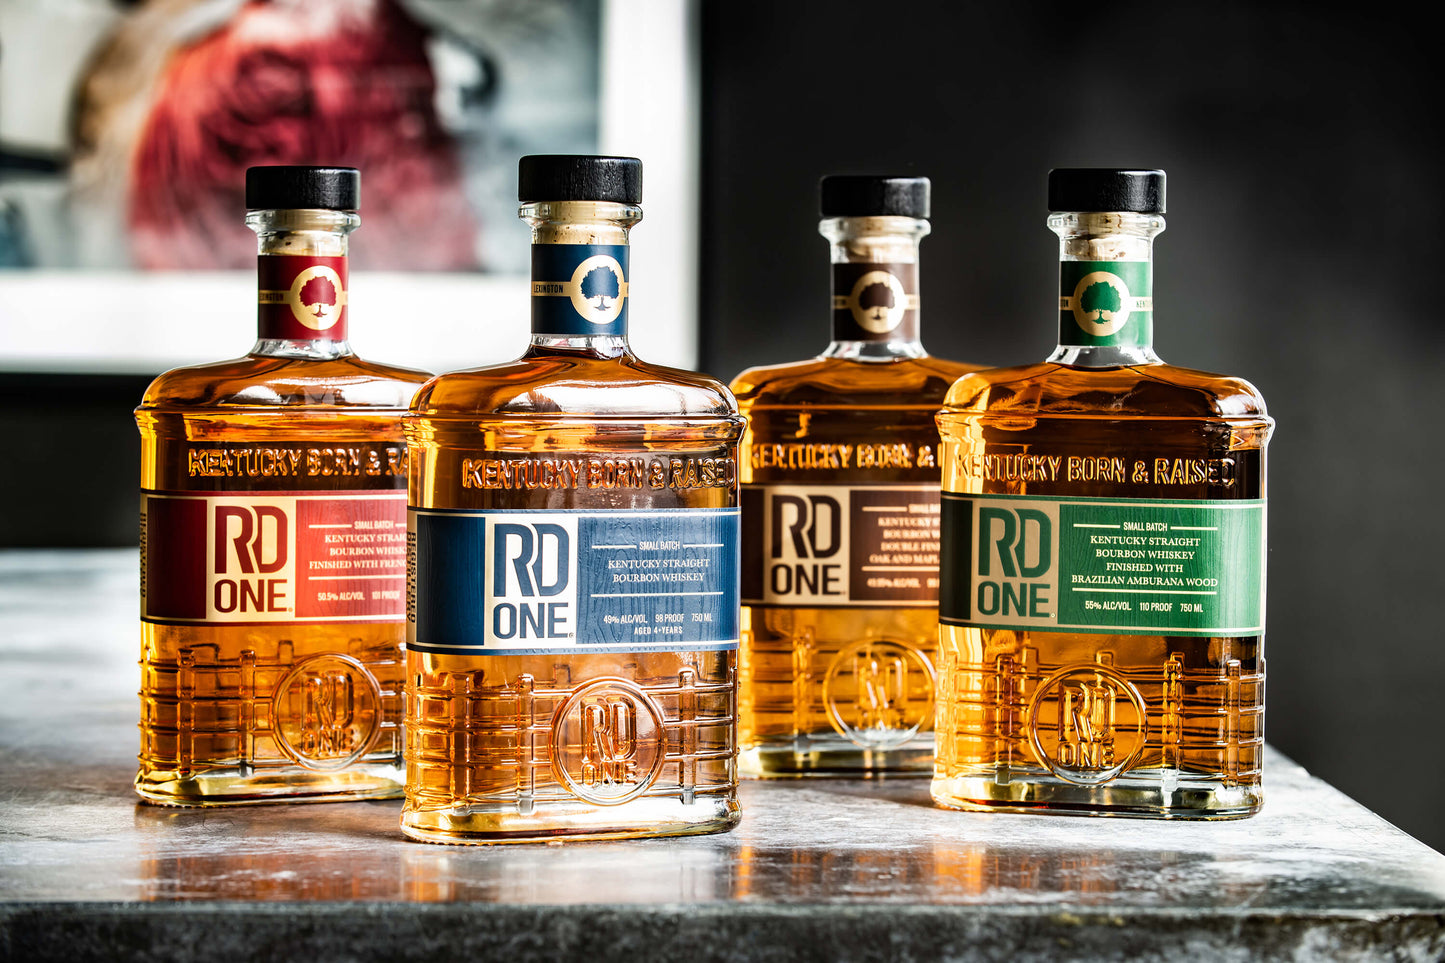 Dec. 27, 2023 – RD1 Celebrates a Year of New Bourbons, Top Industry Awards and U.S. Distribution Growth